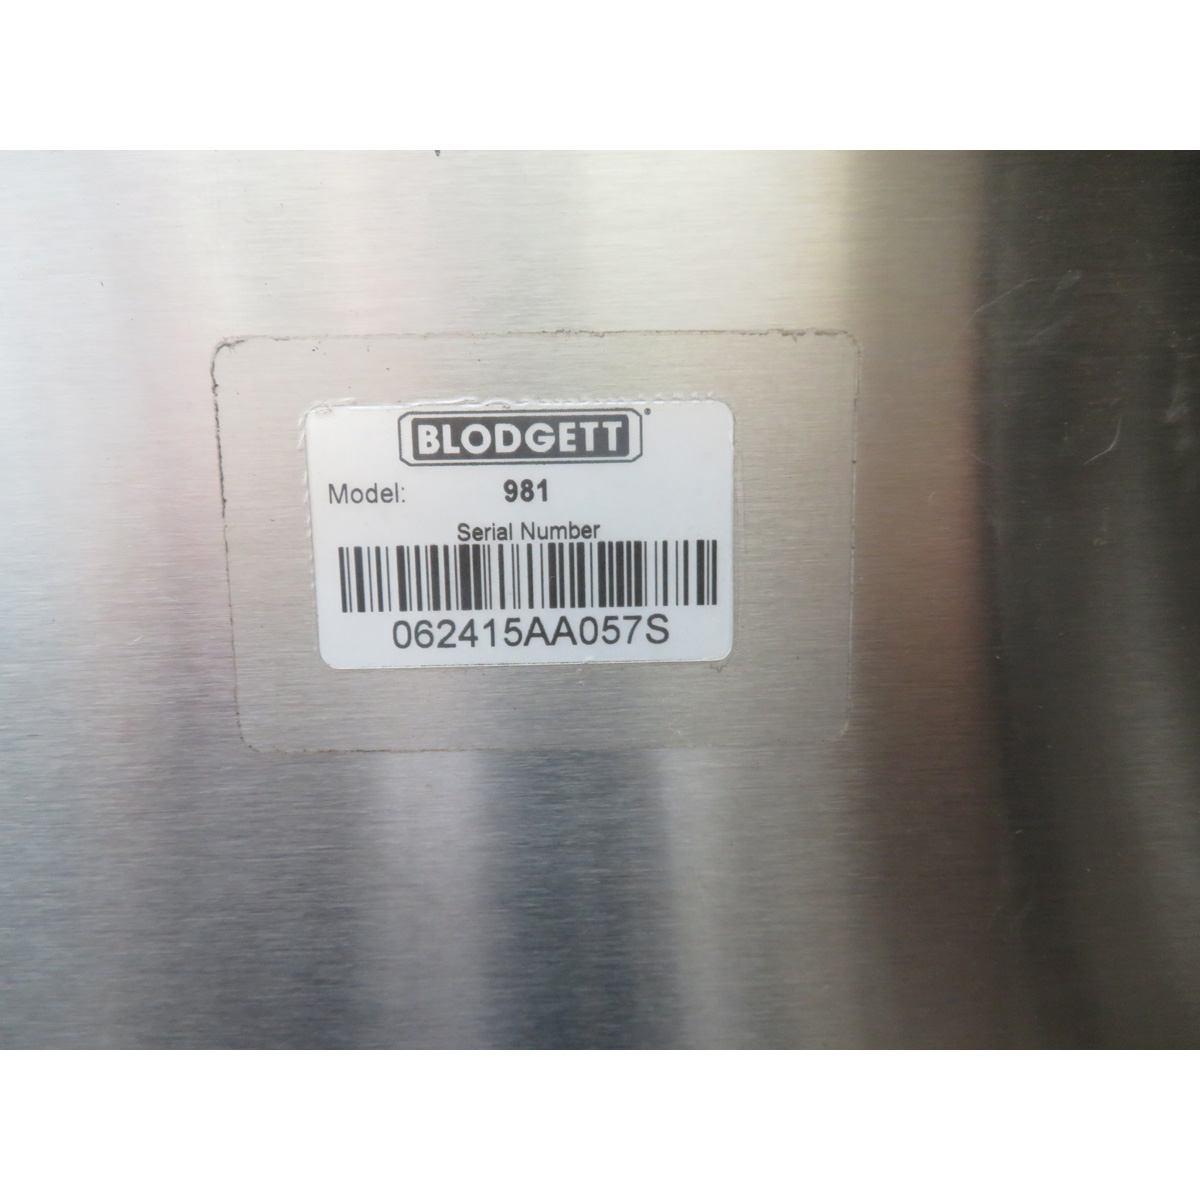 Blodgett 981 Deck Oven, Used Excellent Condition image 4